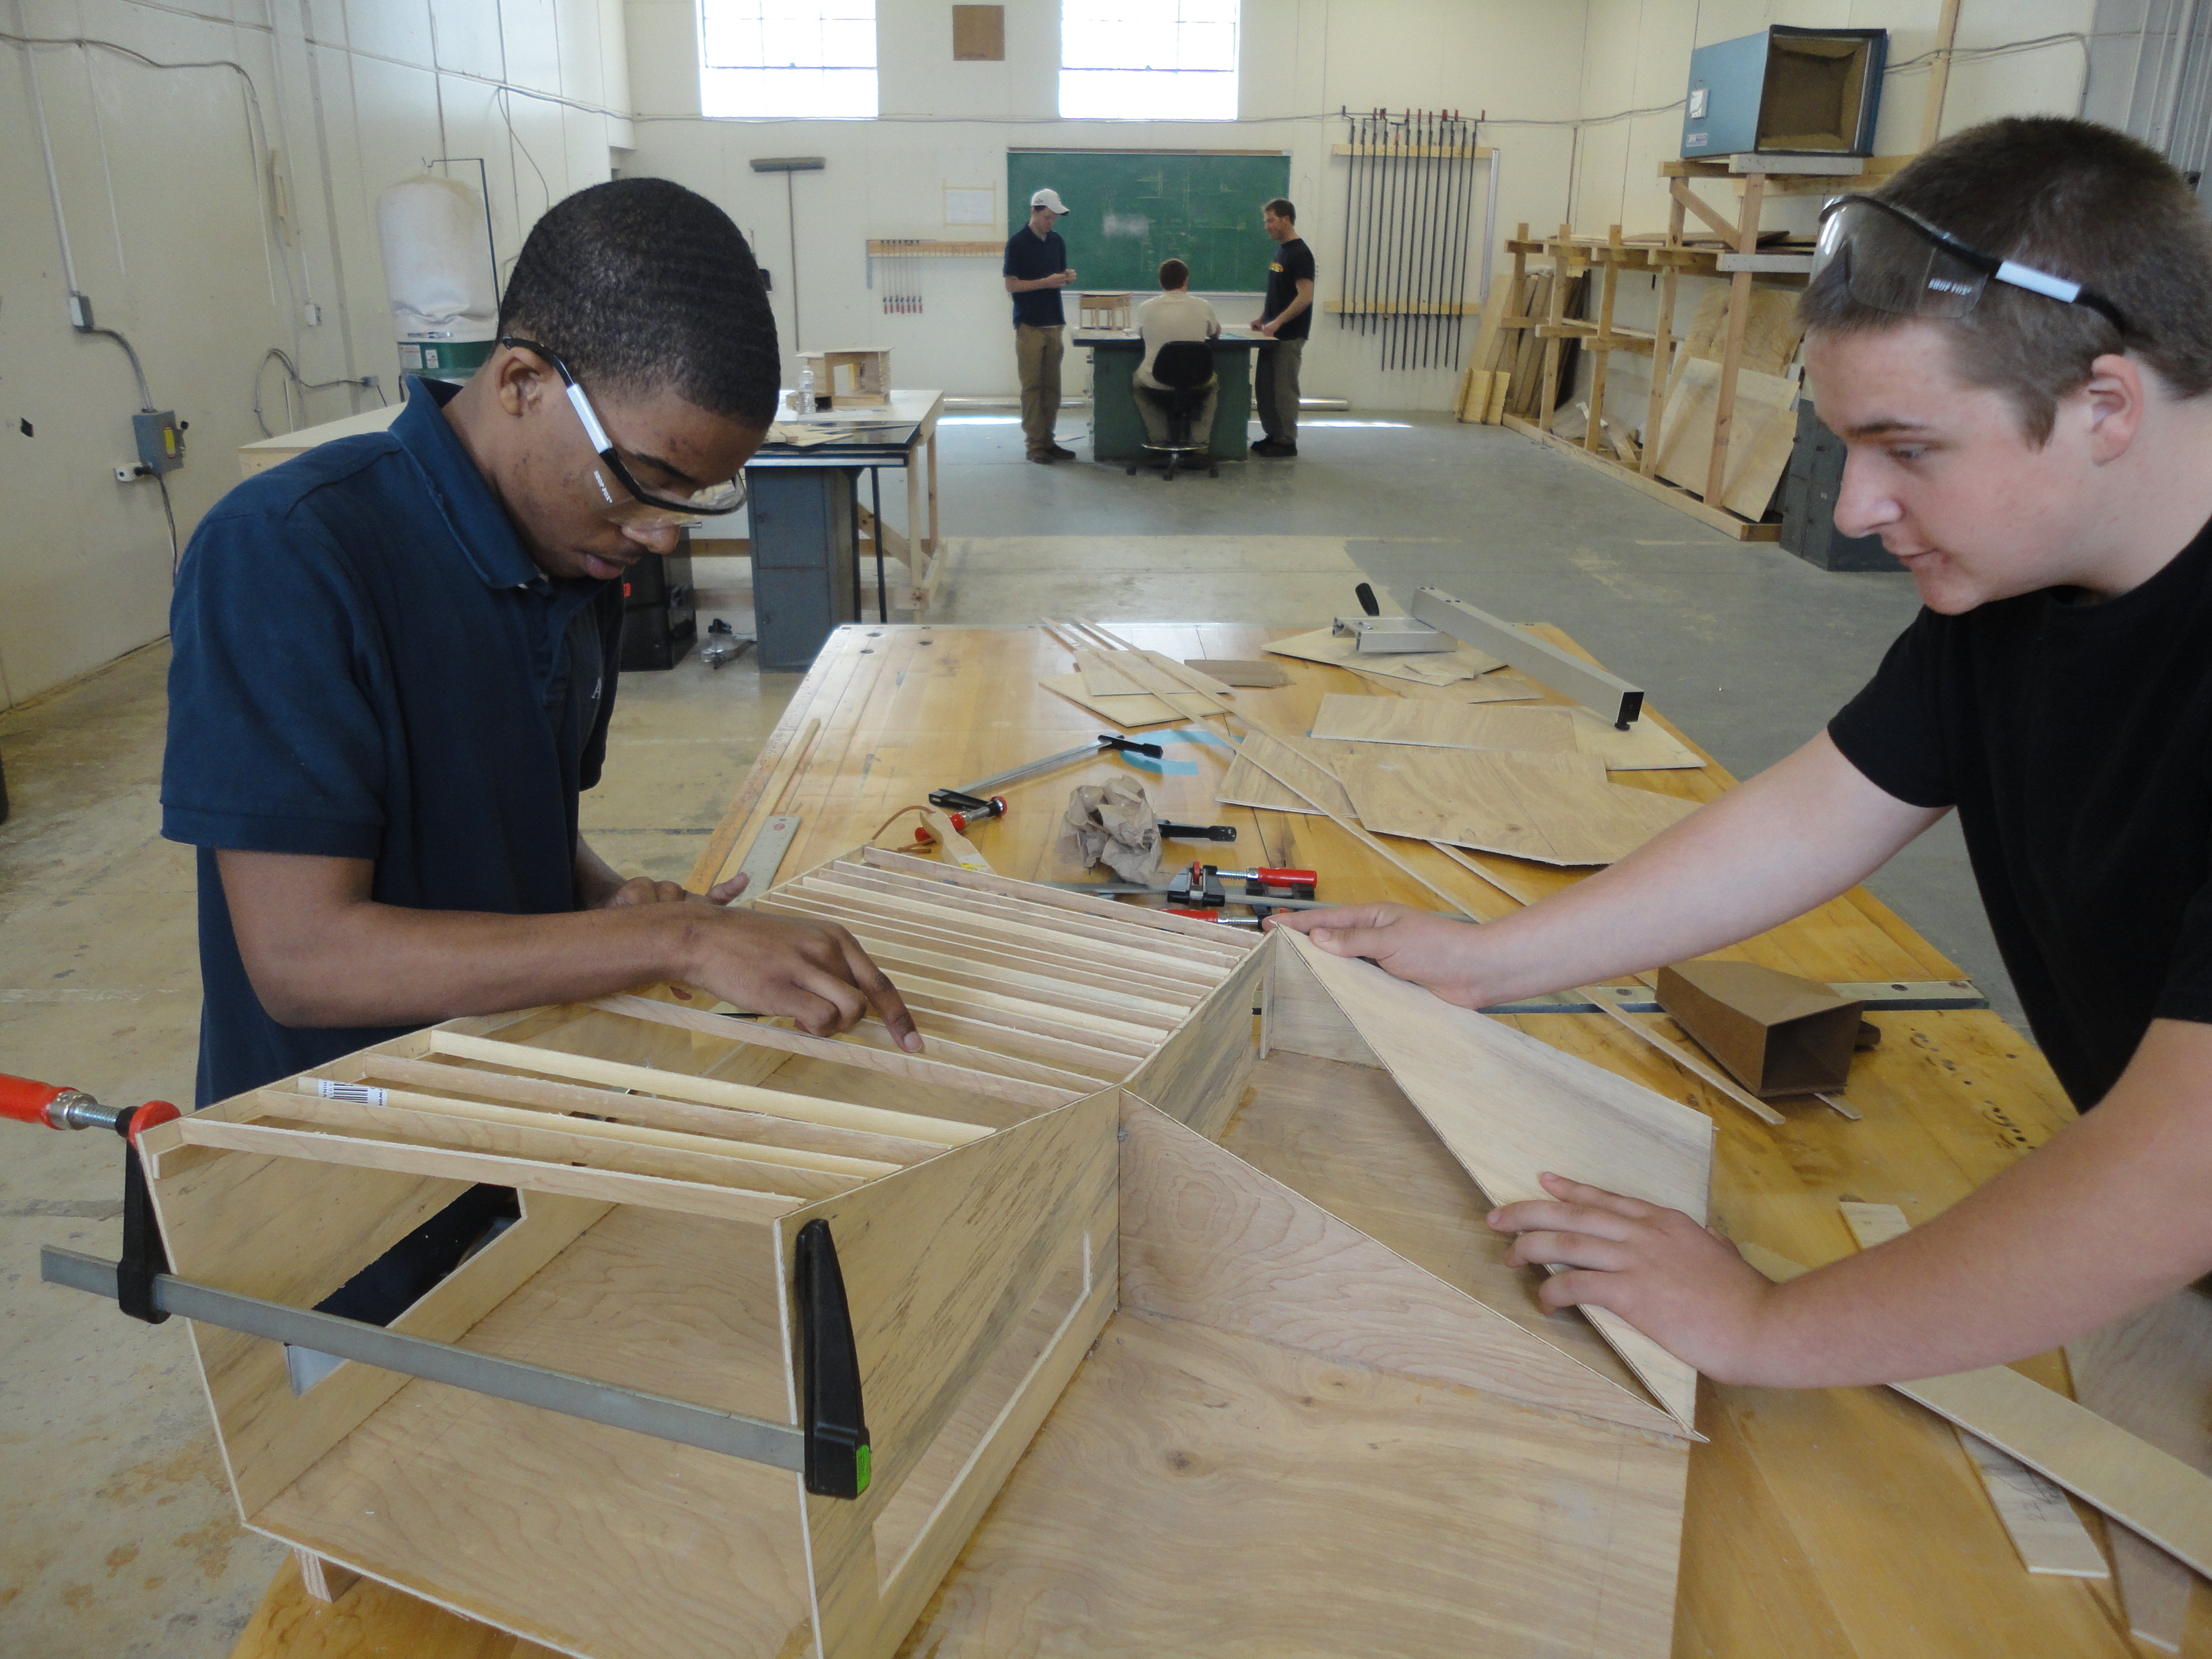 3-studio-h-students-kerron-hayes-and-cameron-perry-from-if-you-build-it-a-long-shot-factory-release-2013